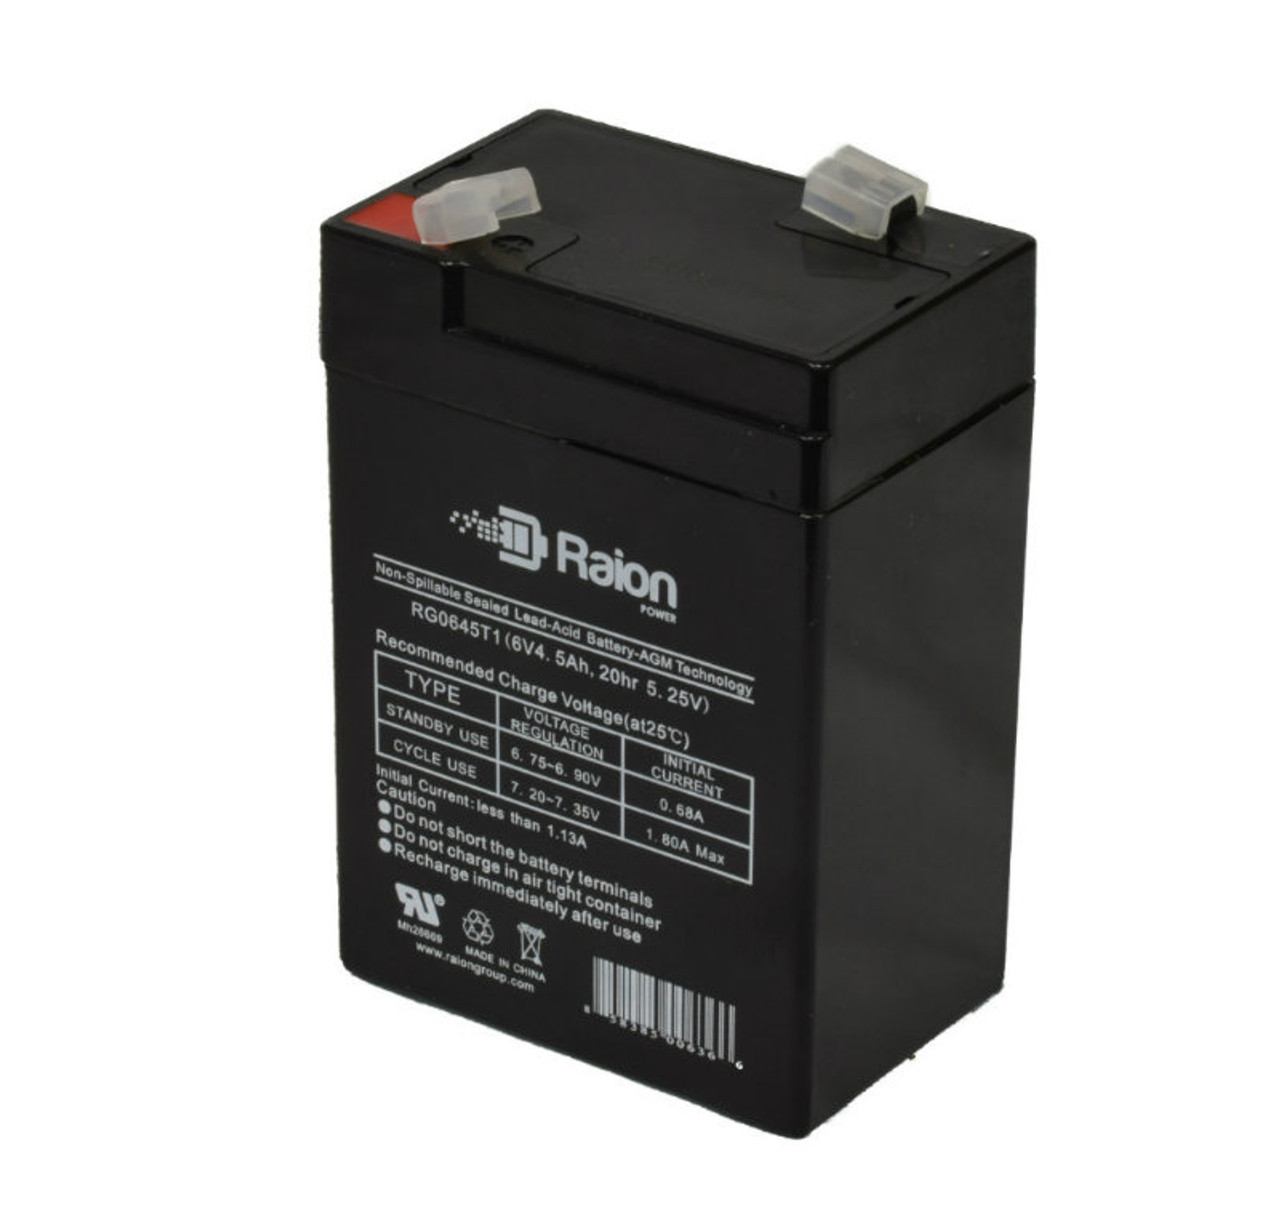 Raion Power RG0645T1 6V 4.5Ah Replacement Battery Cartridge for Lithonia 6ELM2